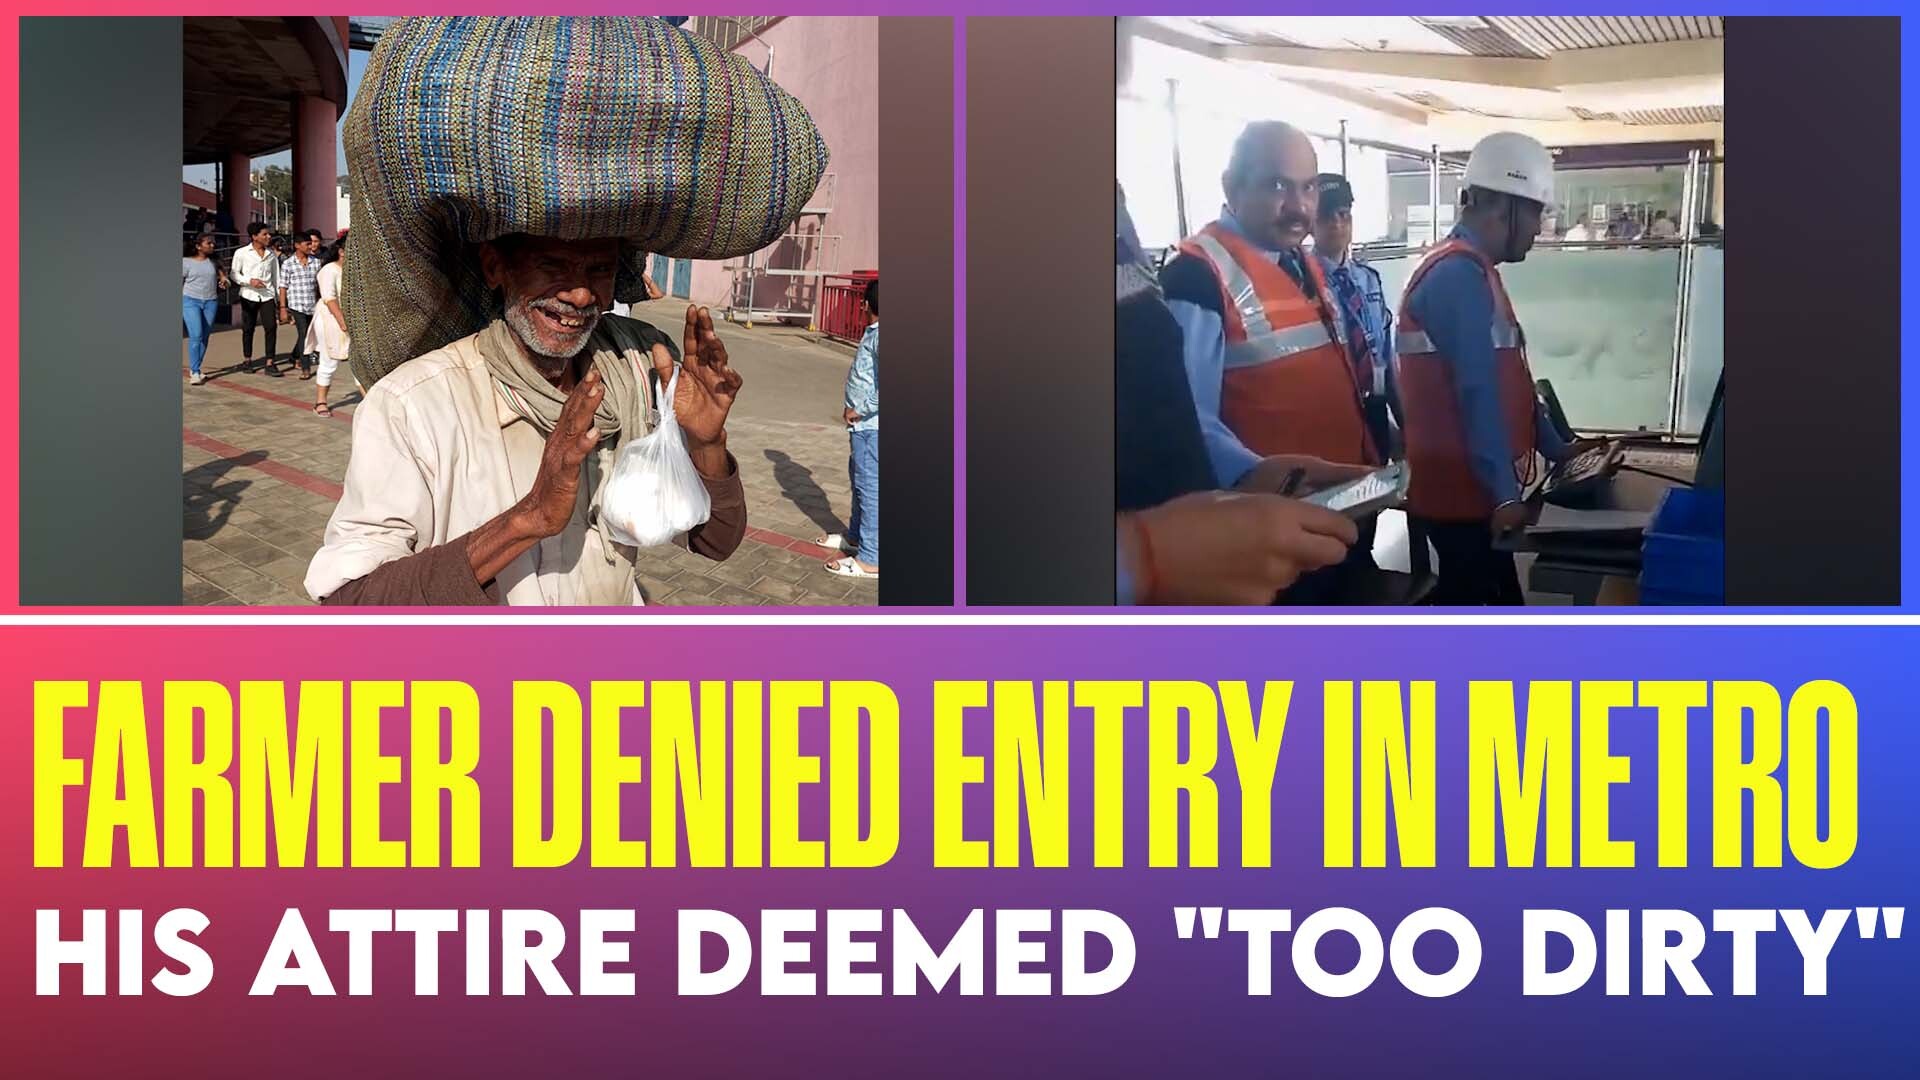 Bangalore Metro denies entry to farmer entry citing ‘inappropriate attire’